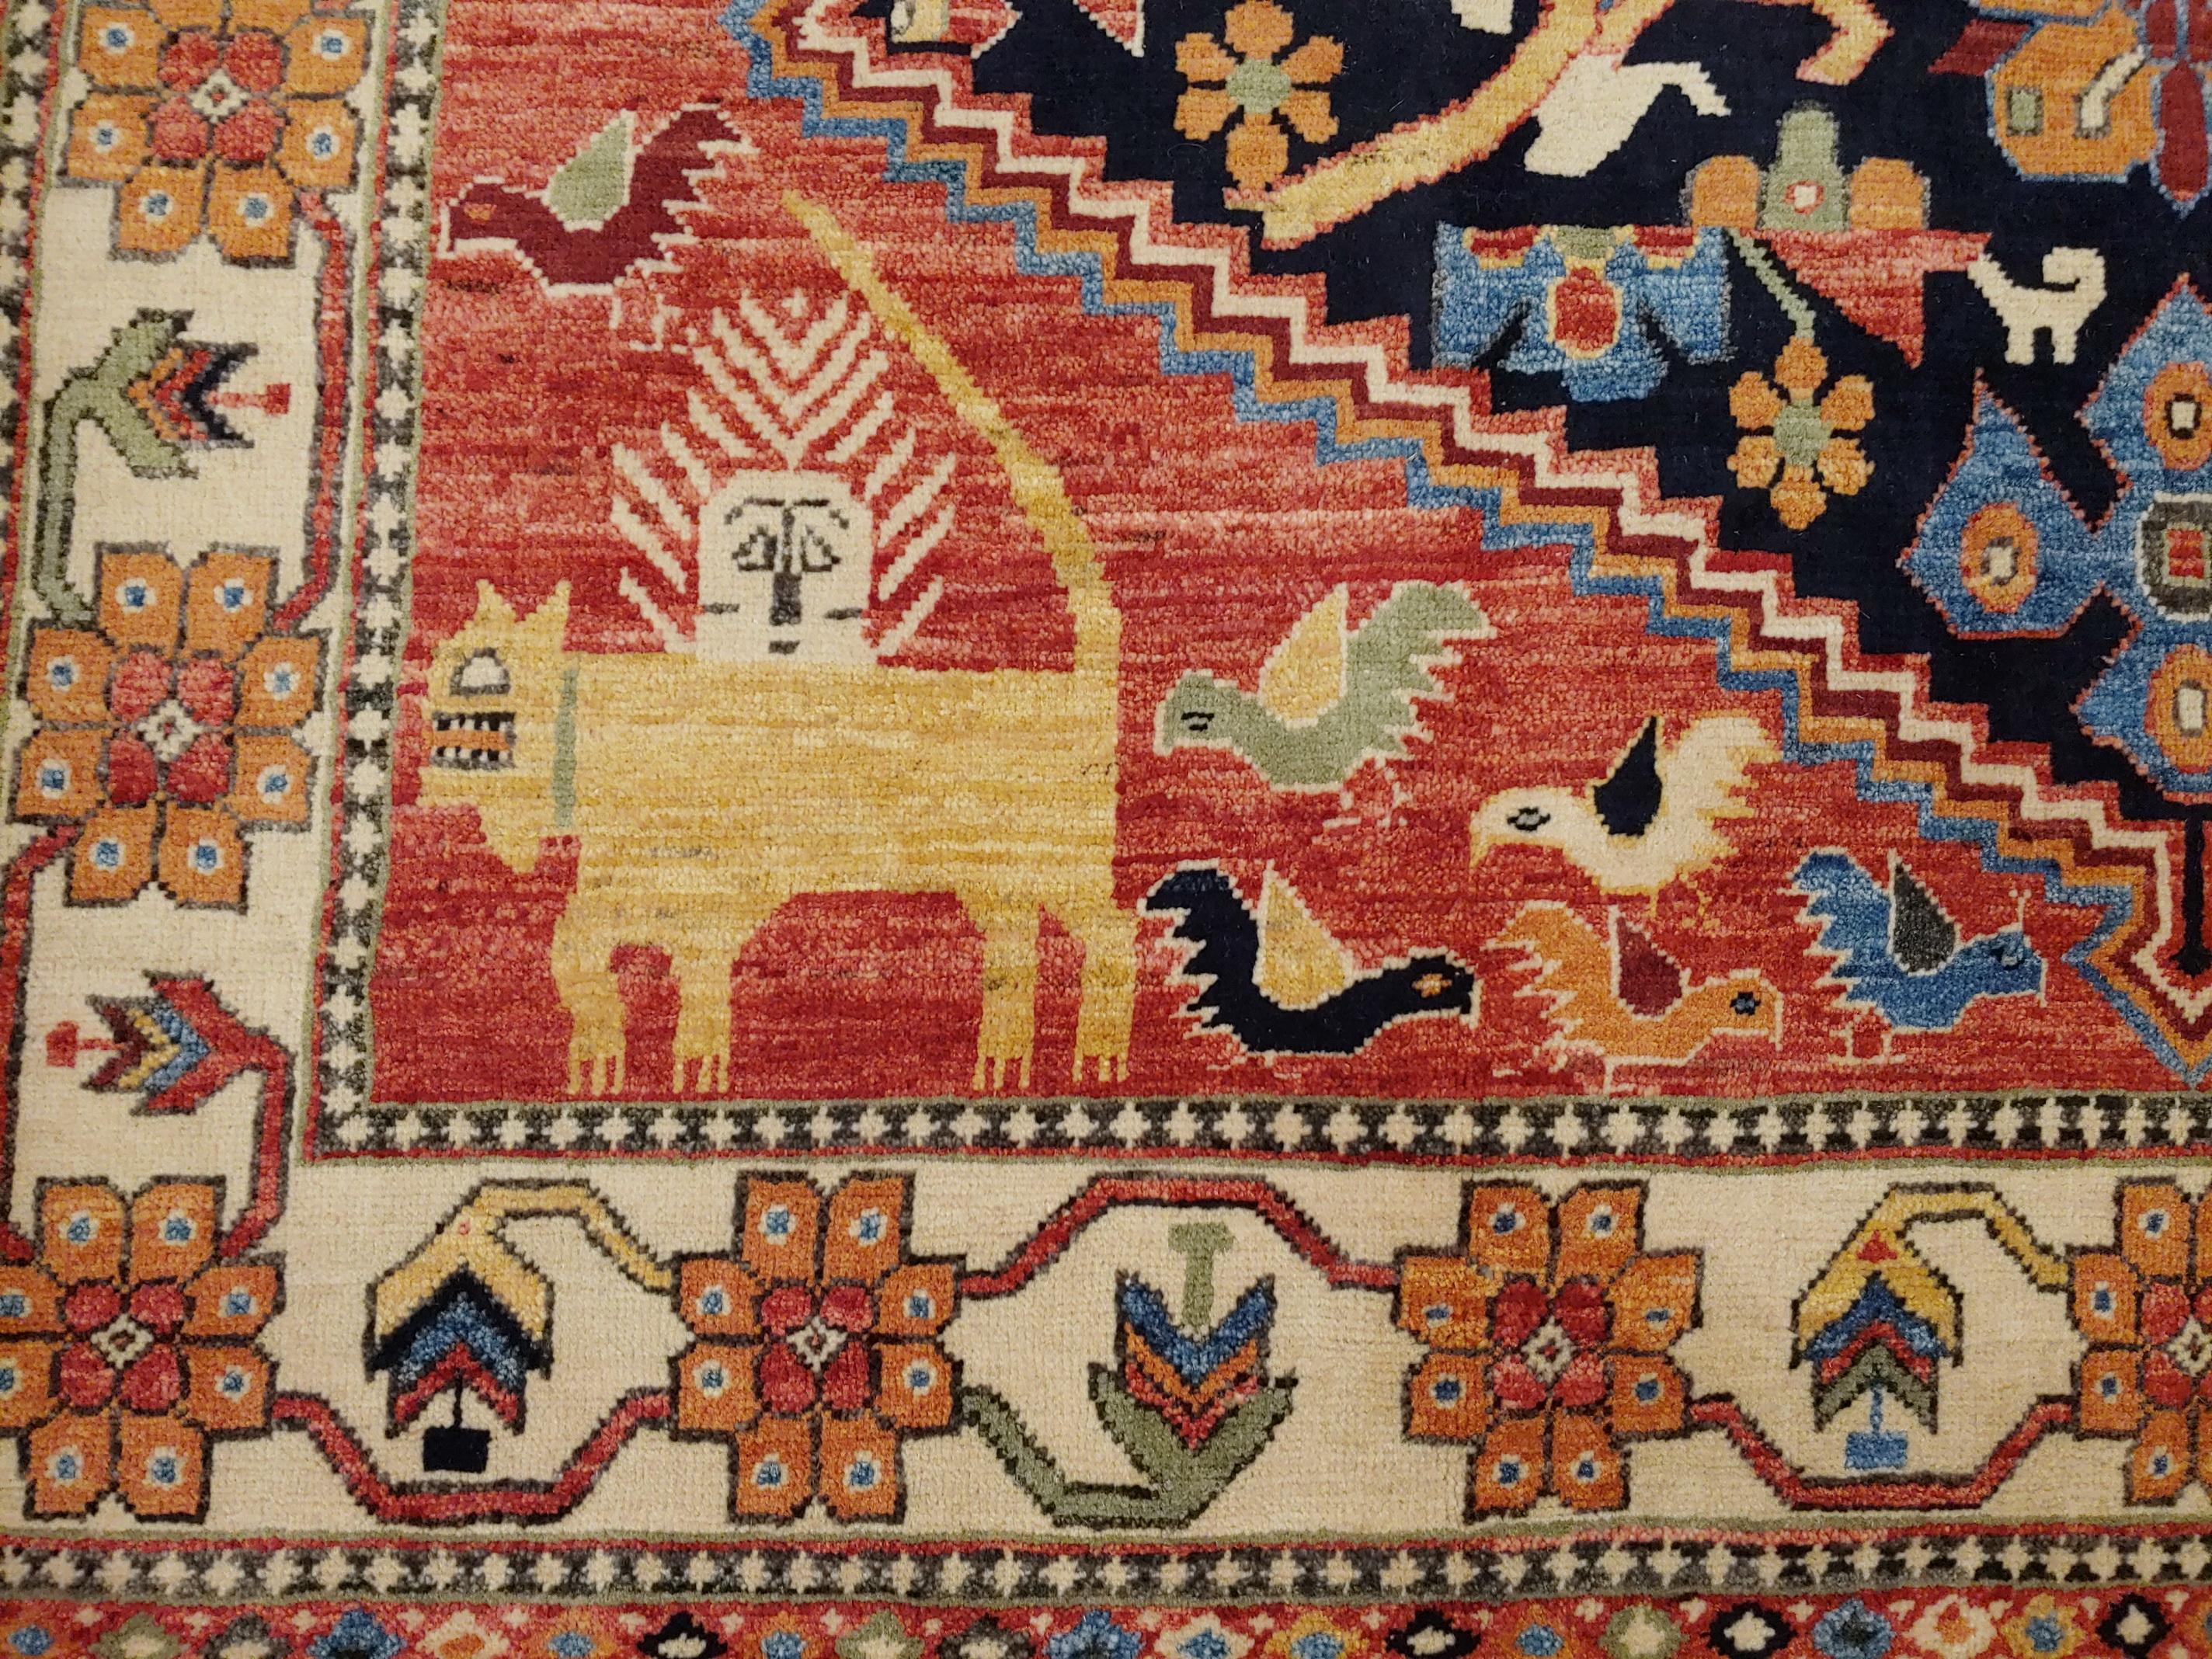 New Rug From Afghanistan, Persian Qashqai Shiraz Design, Wool, Natural Dyes 4x6 In New Condition For Sale In Williamsburg, VA